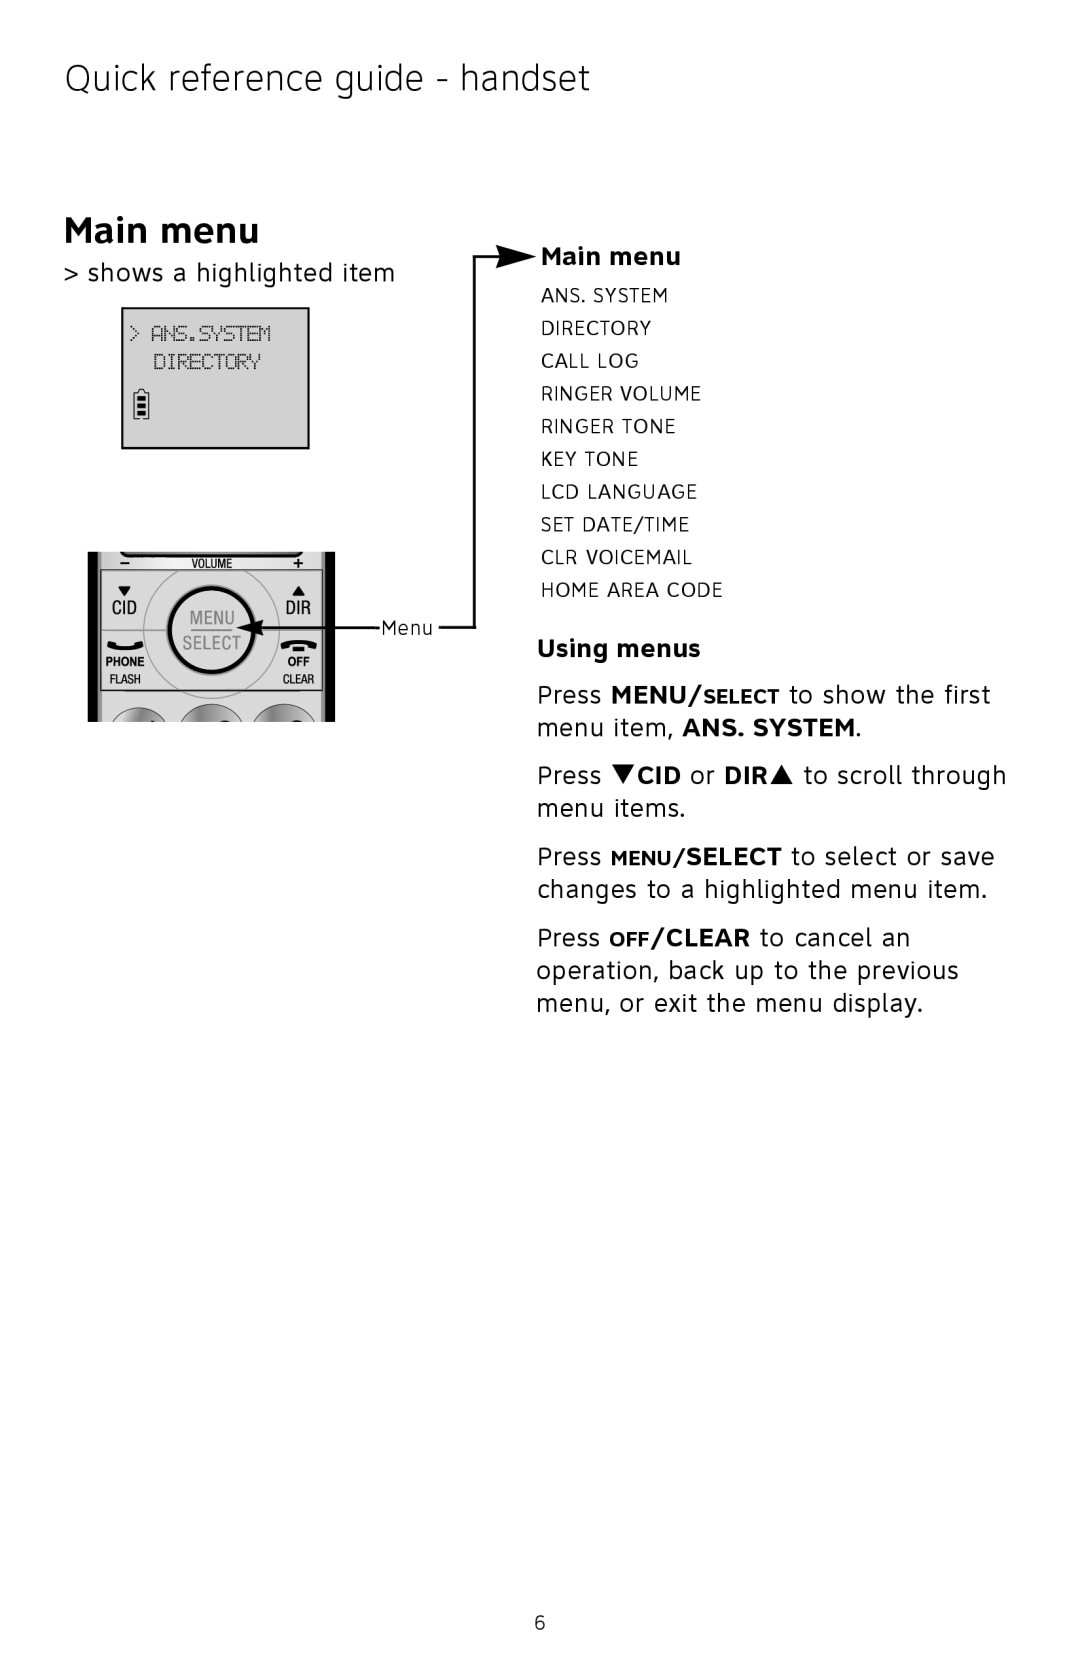 AT&T CL82409, CL82859, CL82609, CL82359, CL82109, CL82209, CL82659 Quick reference guide - handset, Main menu, Using menus 